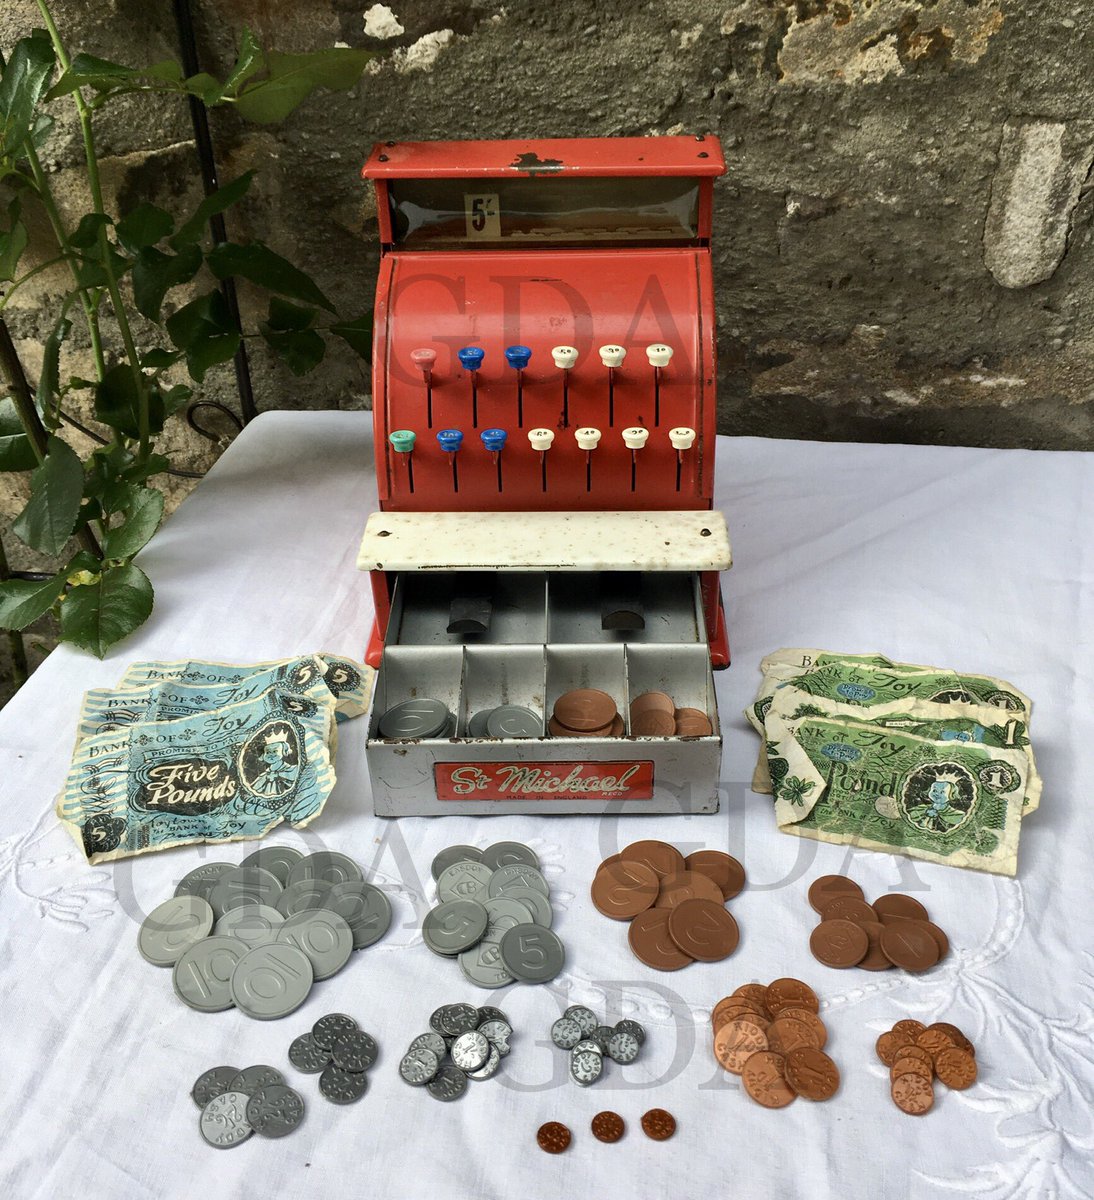 Another child’s cash register, this time produced for St Michael. Again with play money. 
See it and more at,
Dieudonneart.com/antiques 

#vintageshowandsell #buymyshithour #htlmphour
#ForNetworking #MakersHour 
#vintagetoys #toys #collectables
#westmidlandshour #gifts